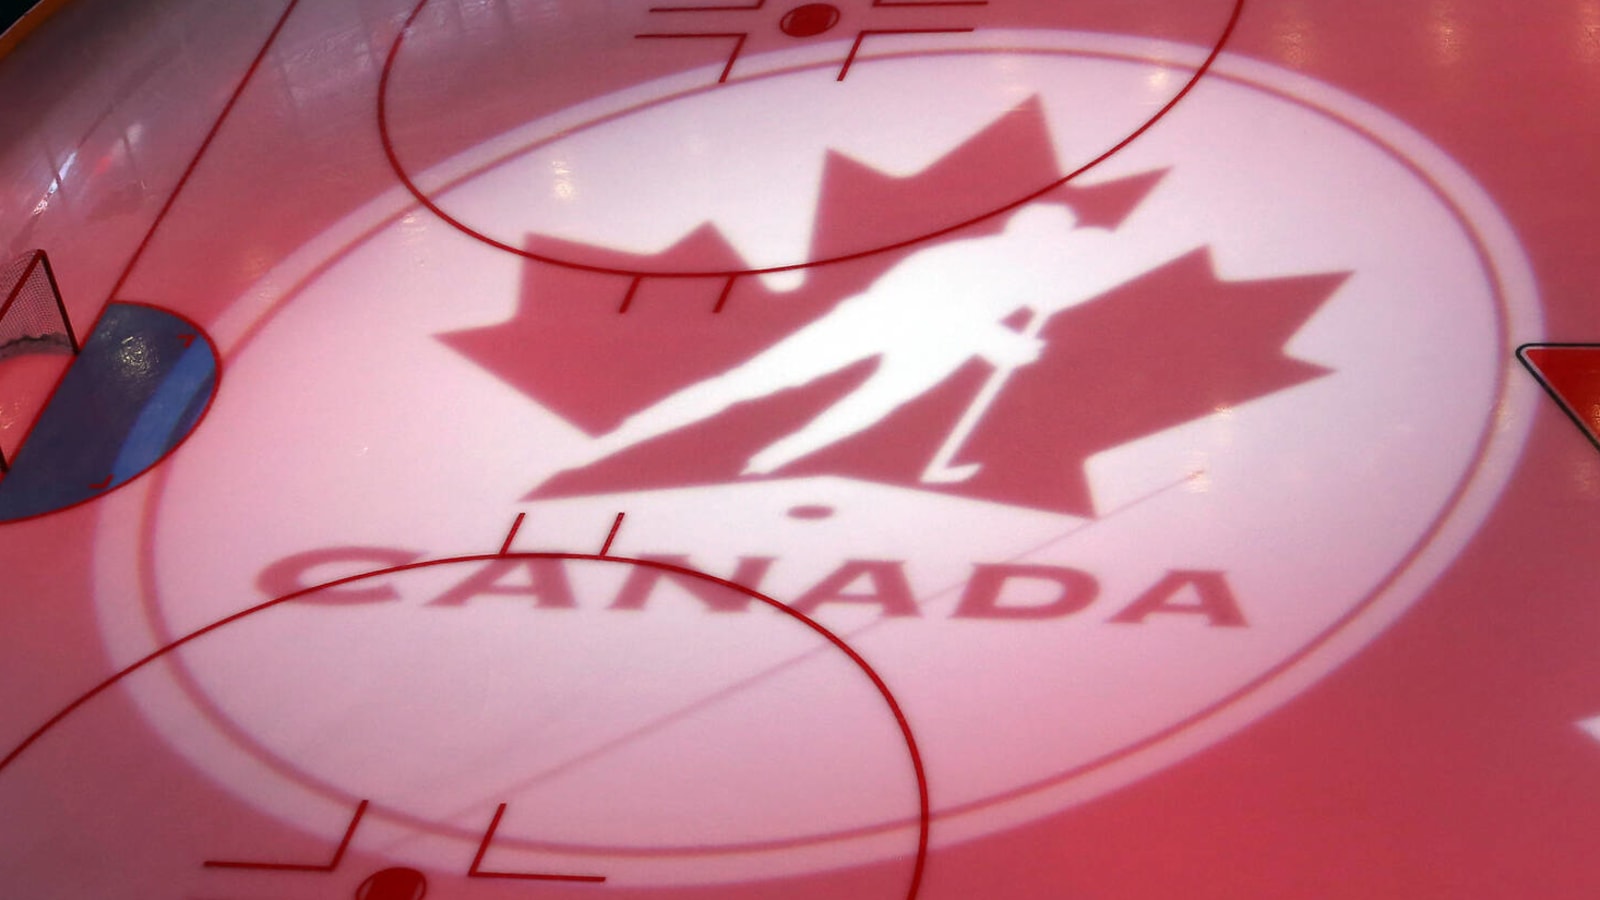 Hockey Canada names new board of directors after scandal